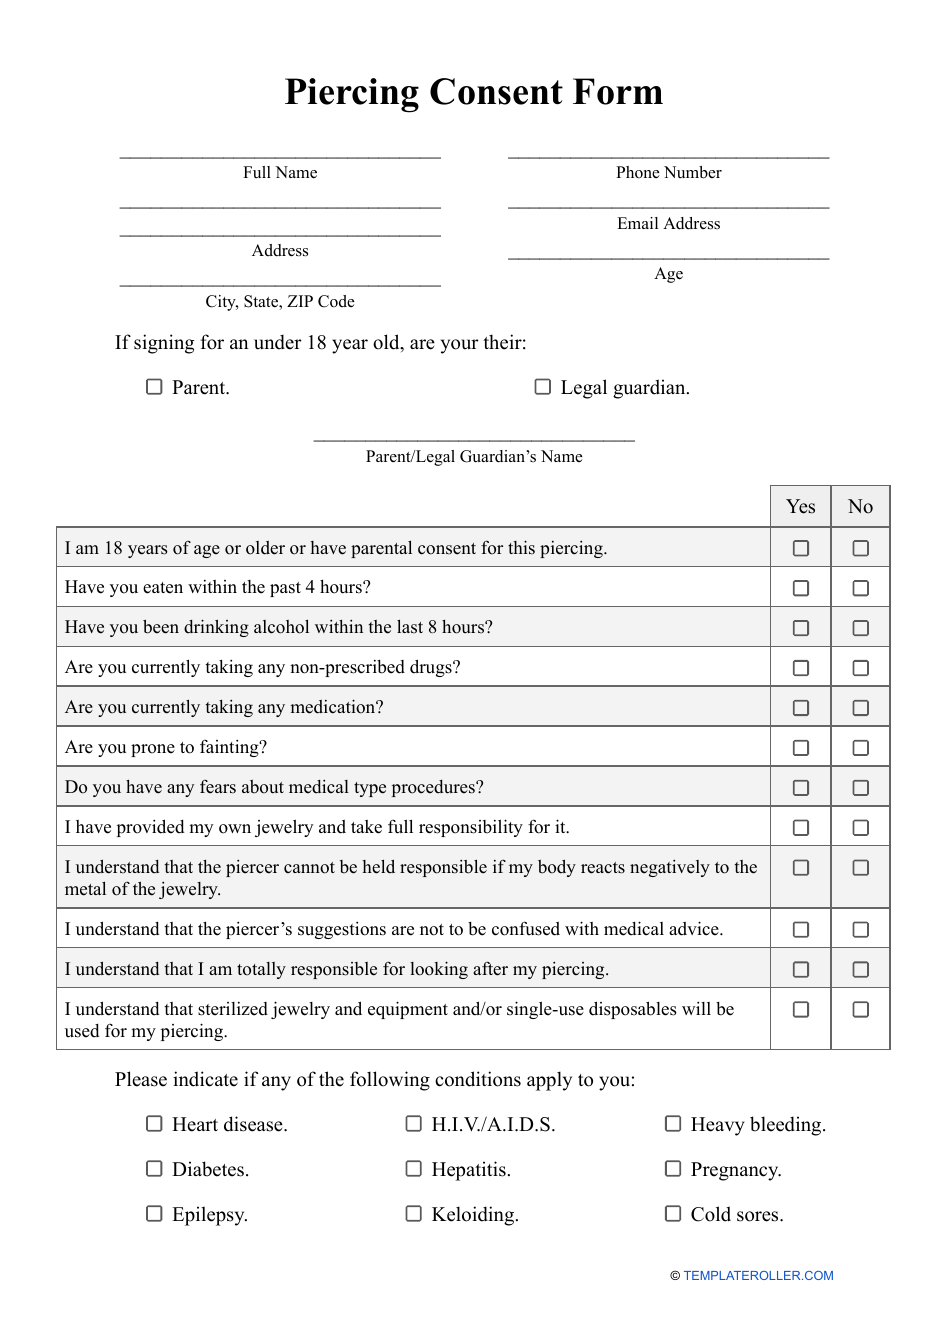 piercing-consent-form-fill-out-sign-online-and-download-pdf